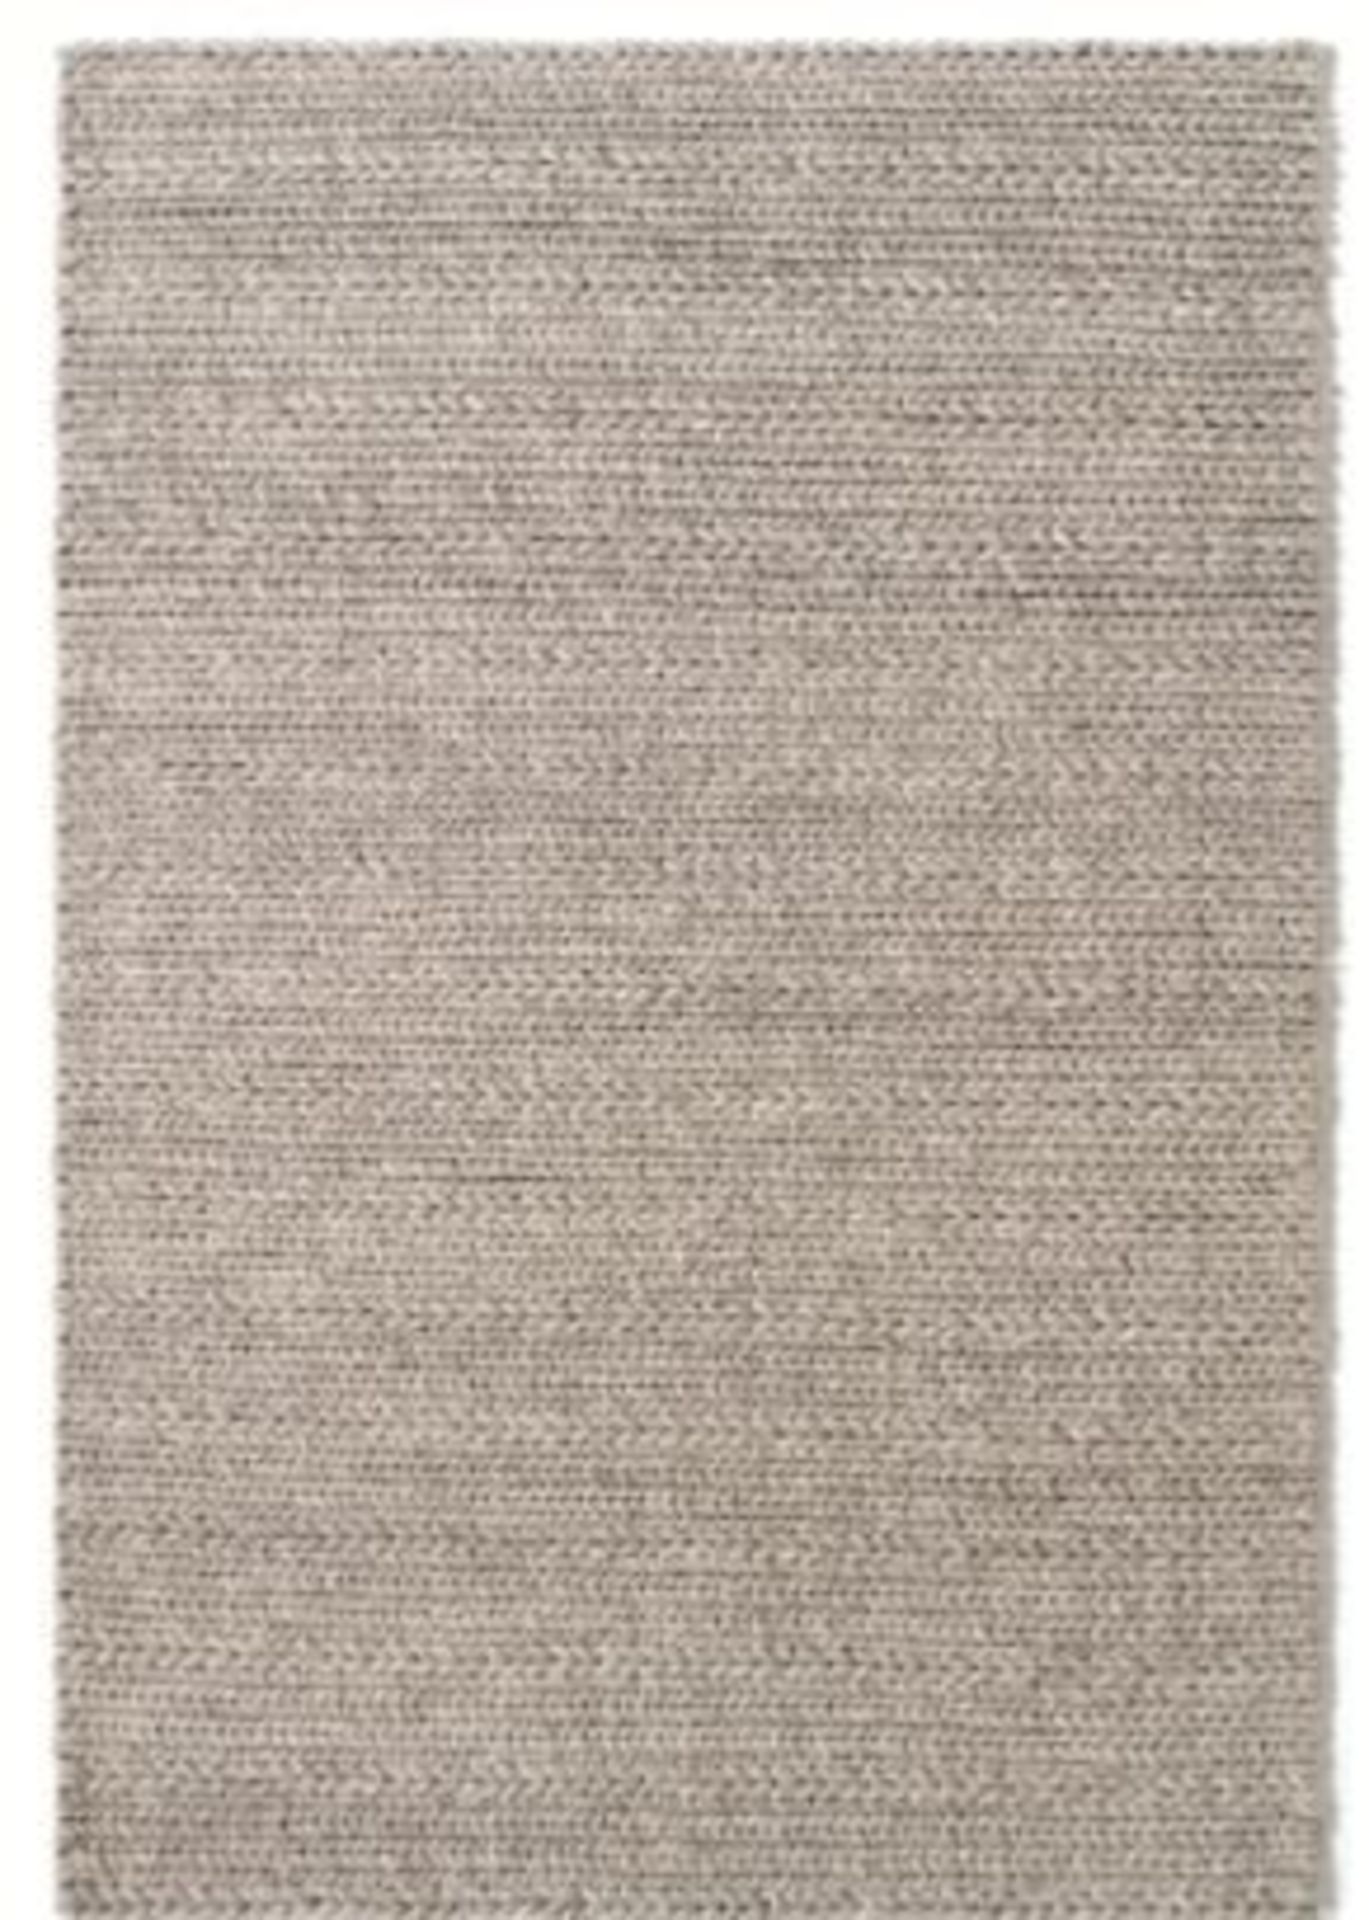 LA REDOUTE DIANO PURE WOOL KNIT EFFECT RUG 120X170CM